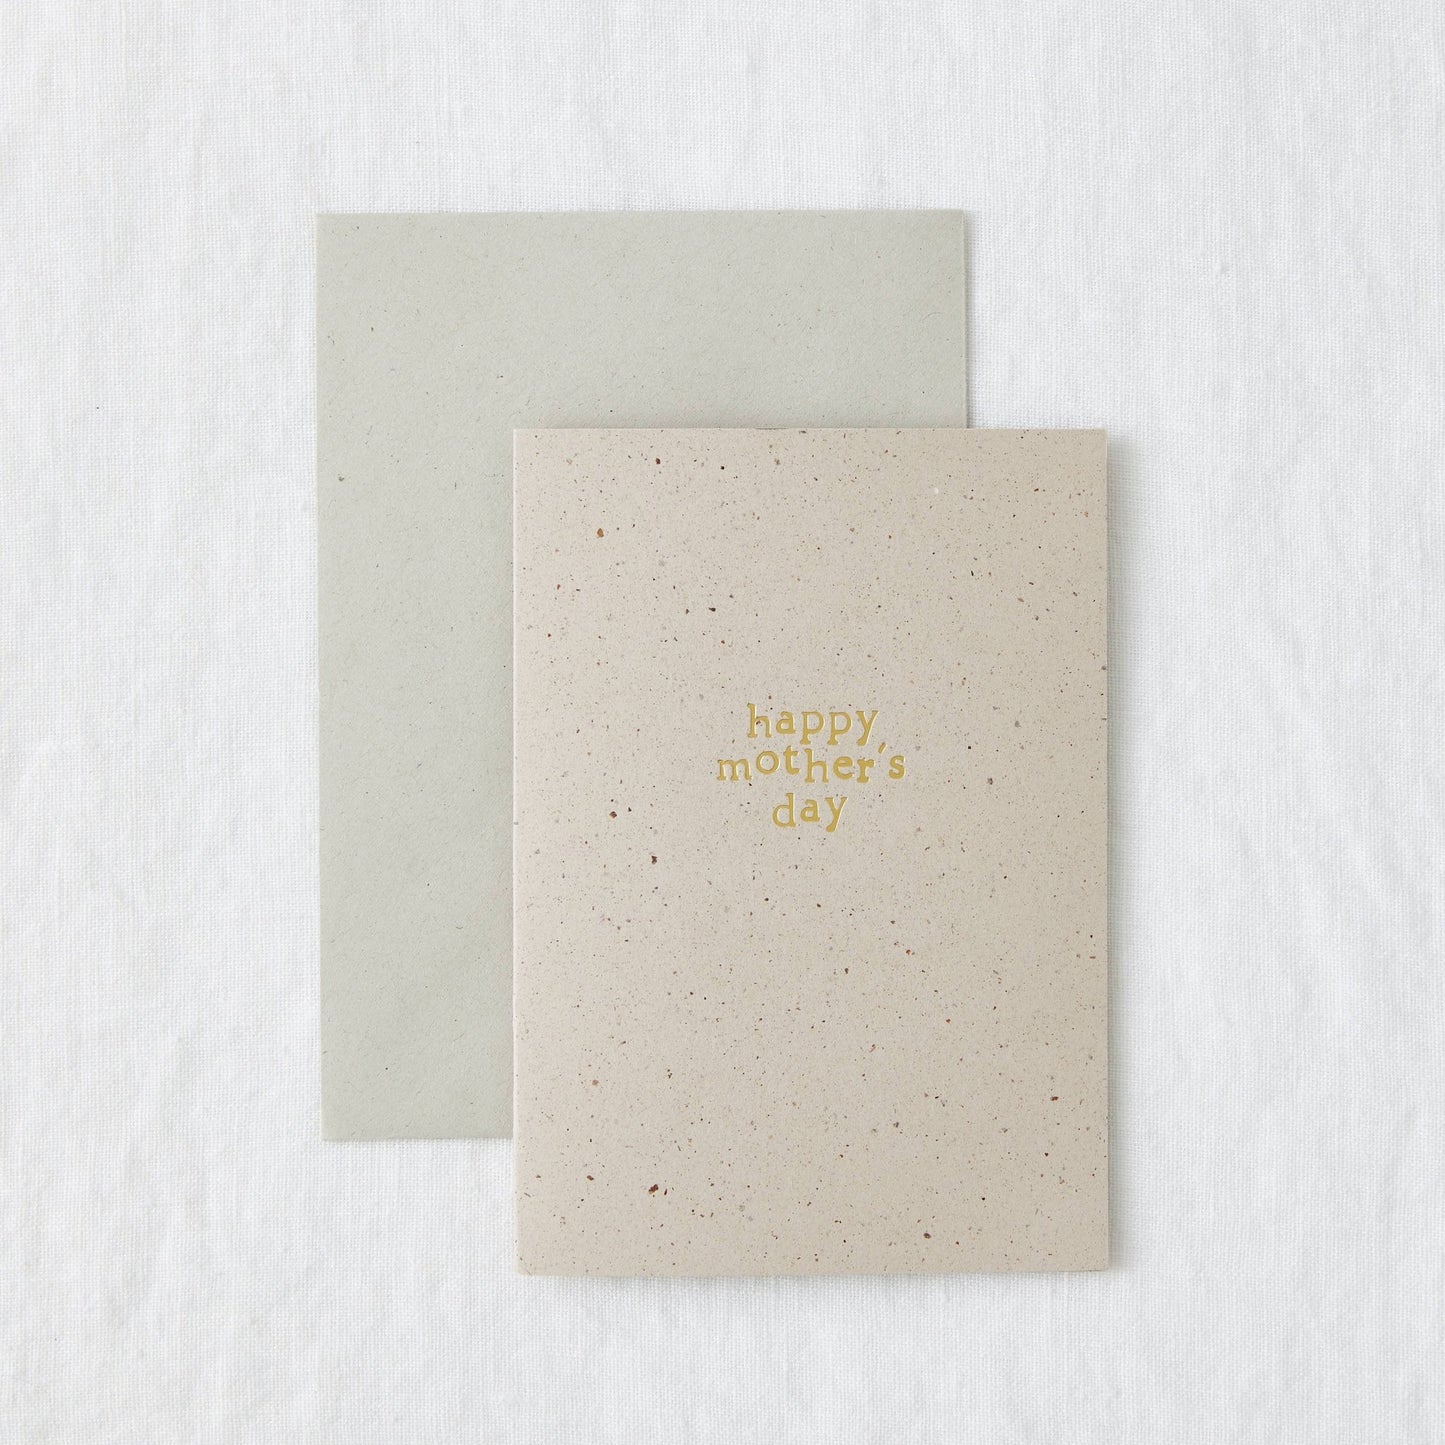 Happy Mother's Day Card - Gold Foil Mother's Day Card - maidwellway